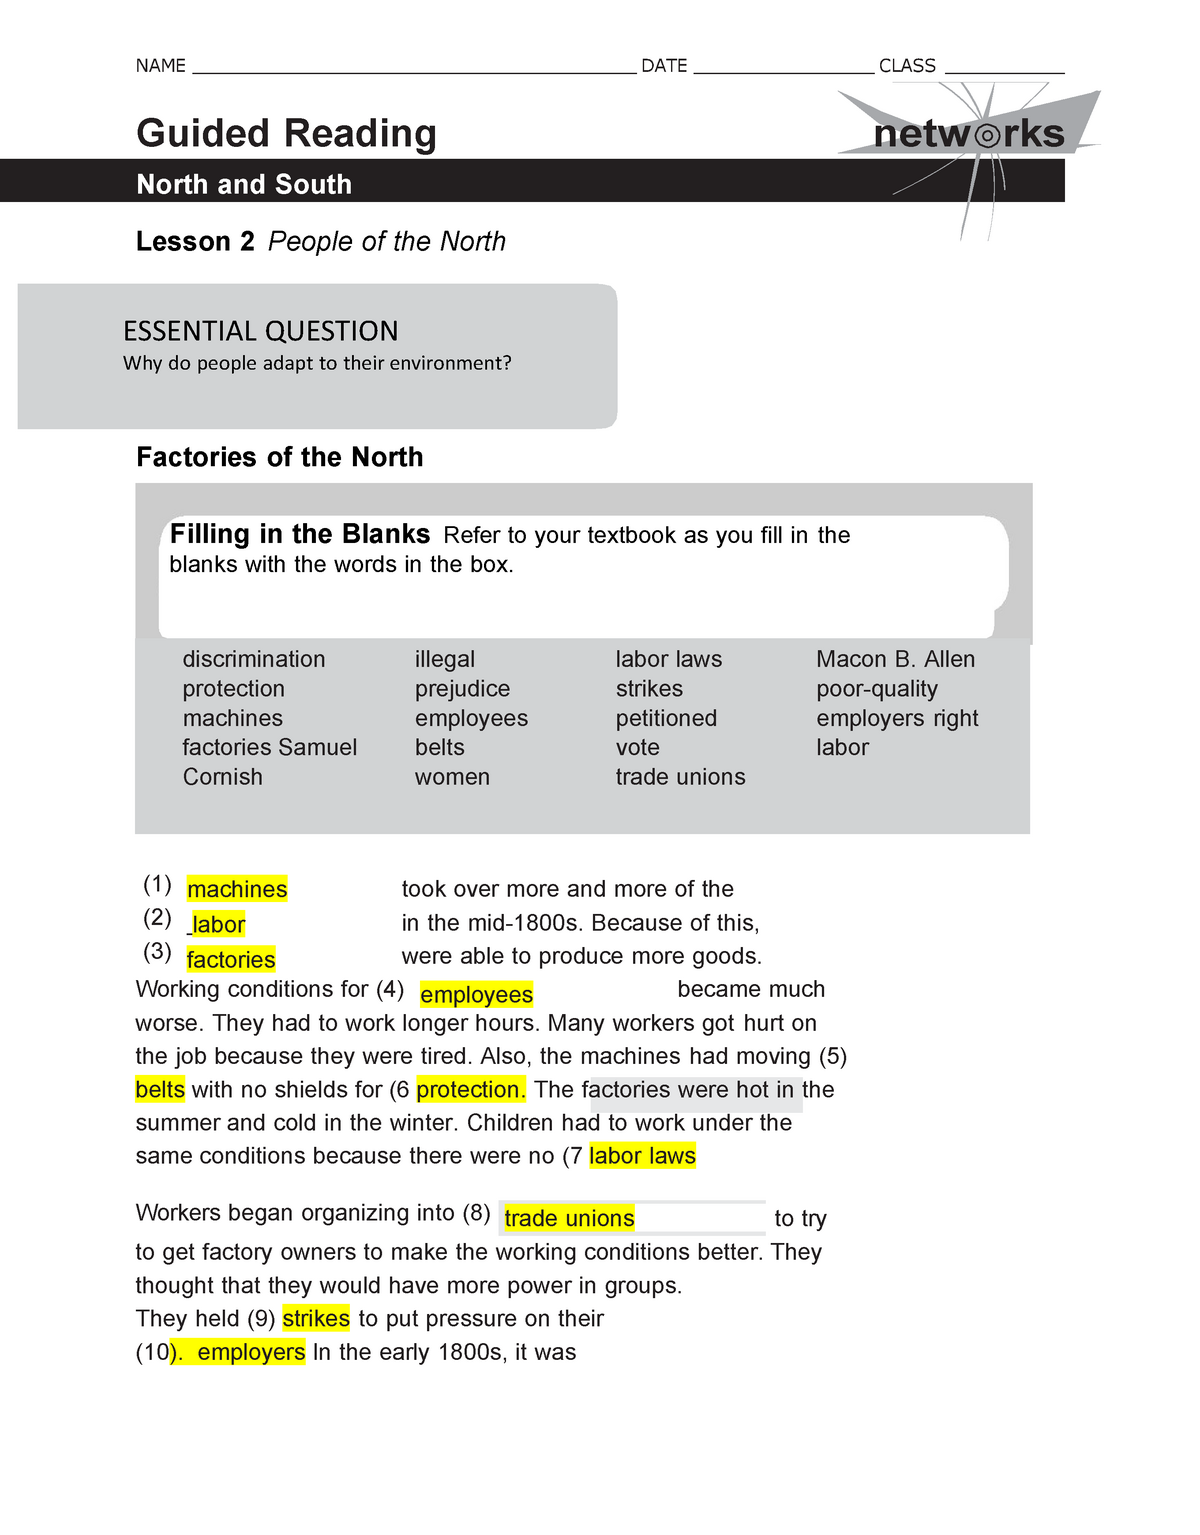 guided-reading-activity-lesson-2-people-of-the-north-kiara-wilson